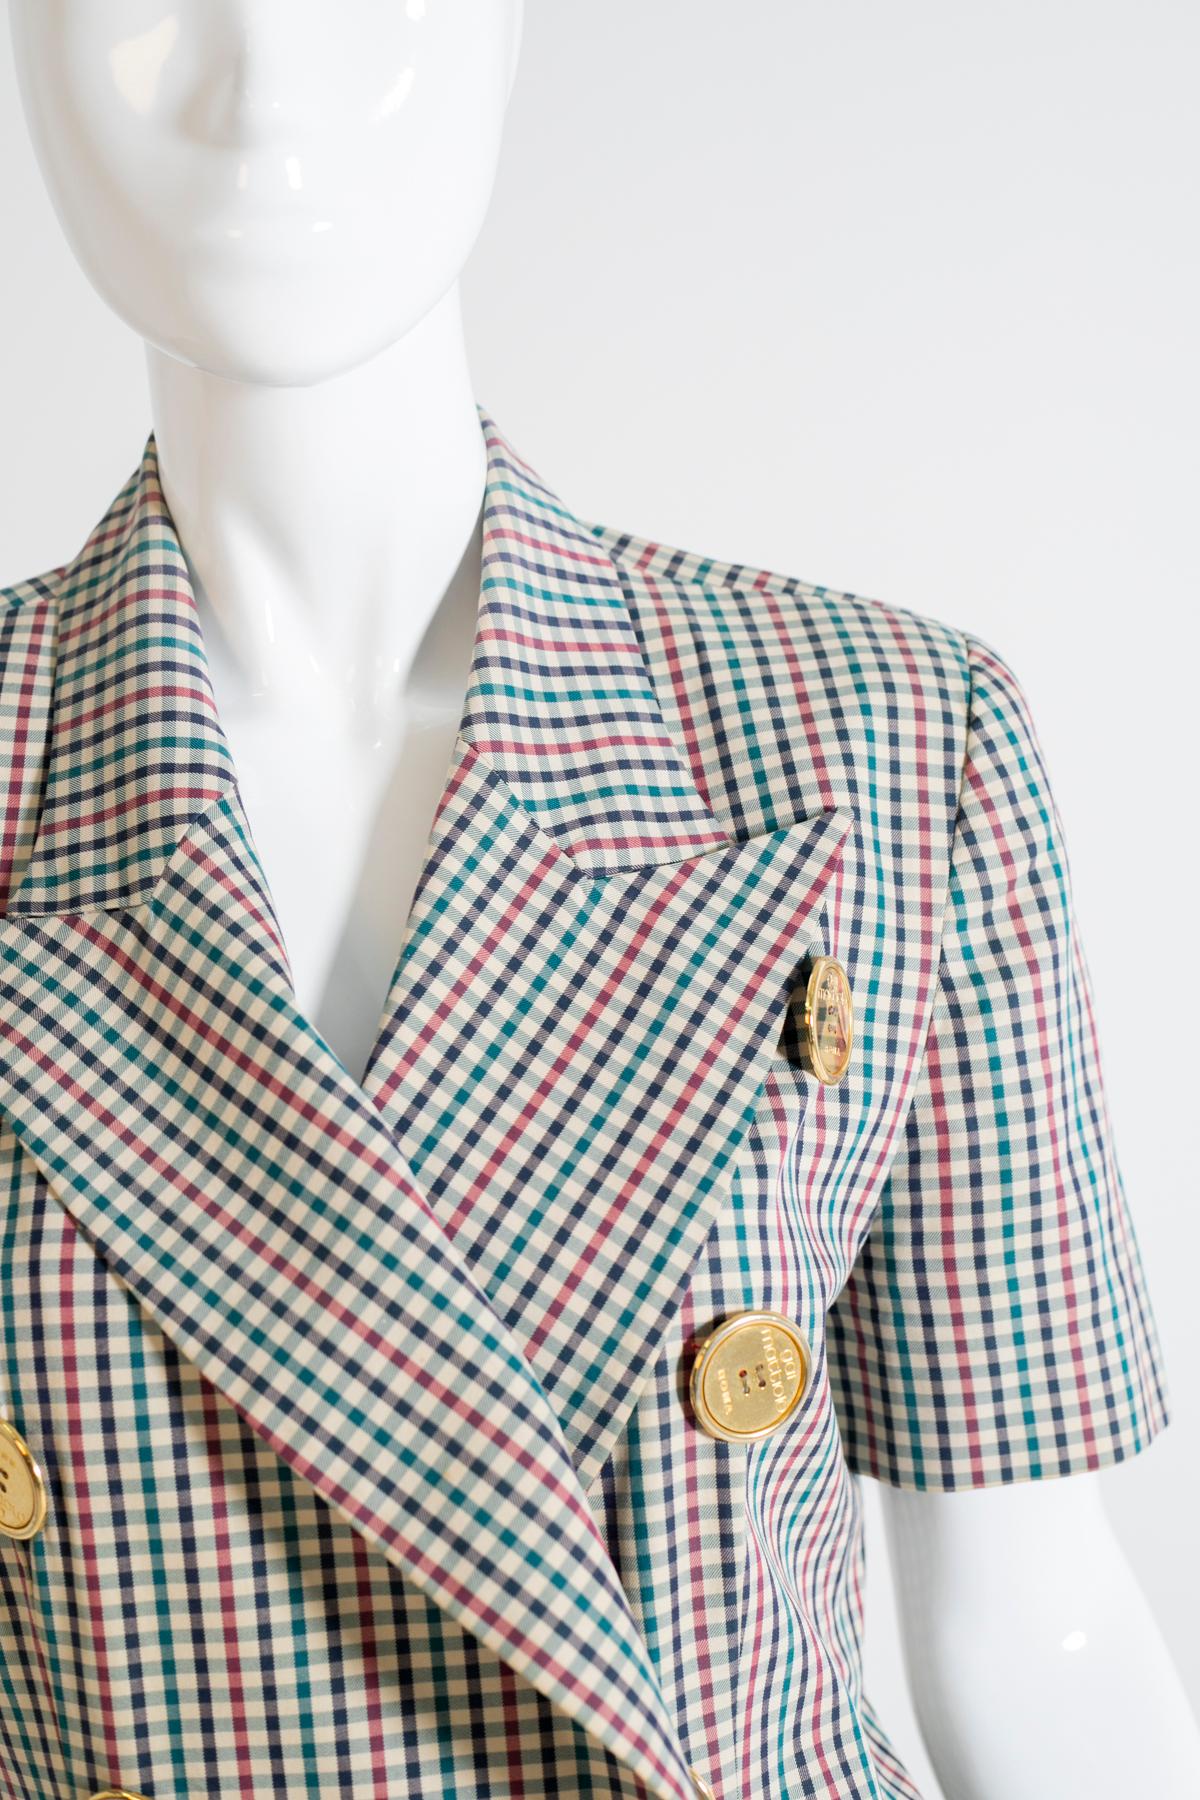 Gai Mattiolo Elegant Vintage Checkered Suit In Good Condition For Sale In Milano, IT